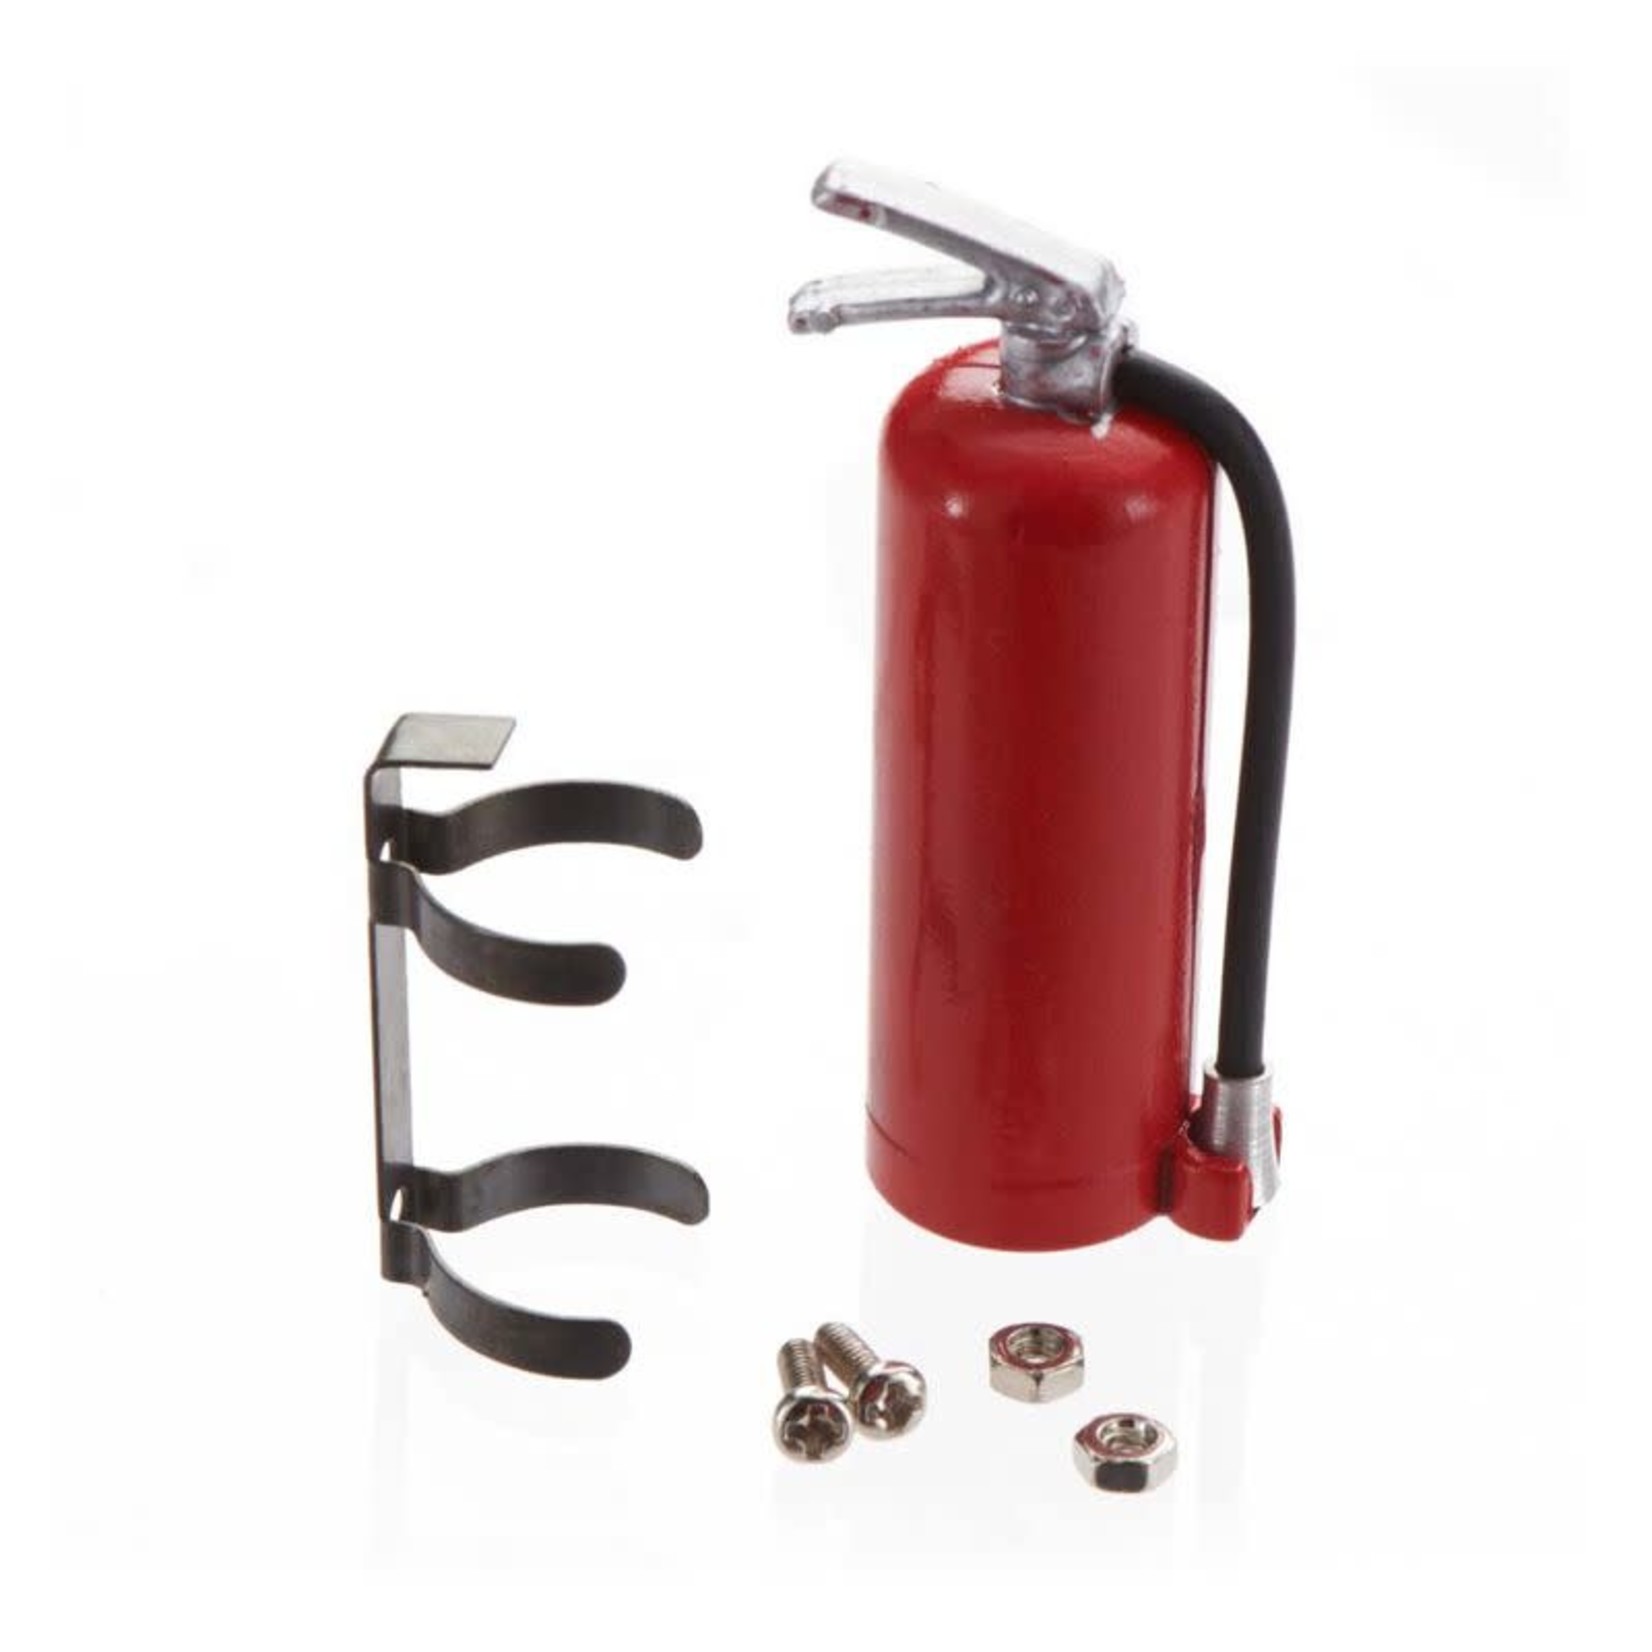 Hobby Details 1/10 Scale Fire Extinguisher w/Mount